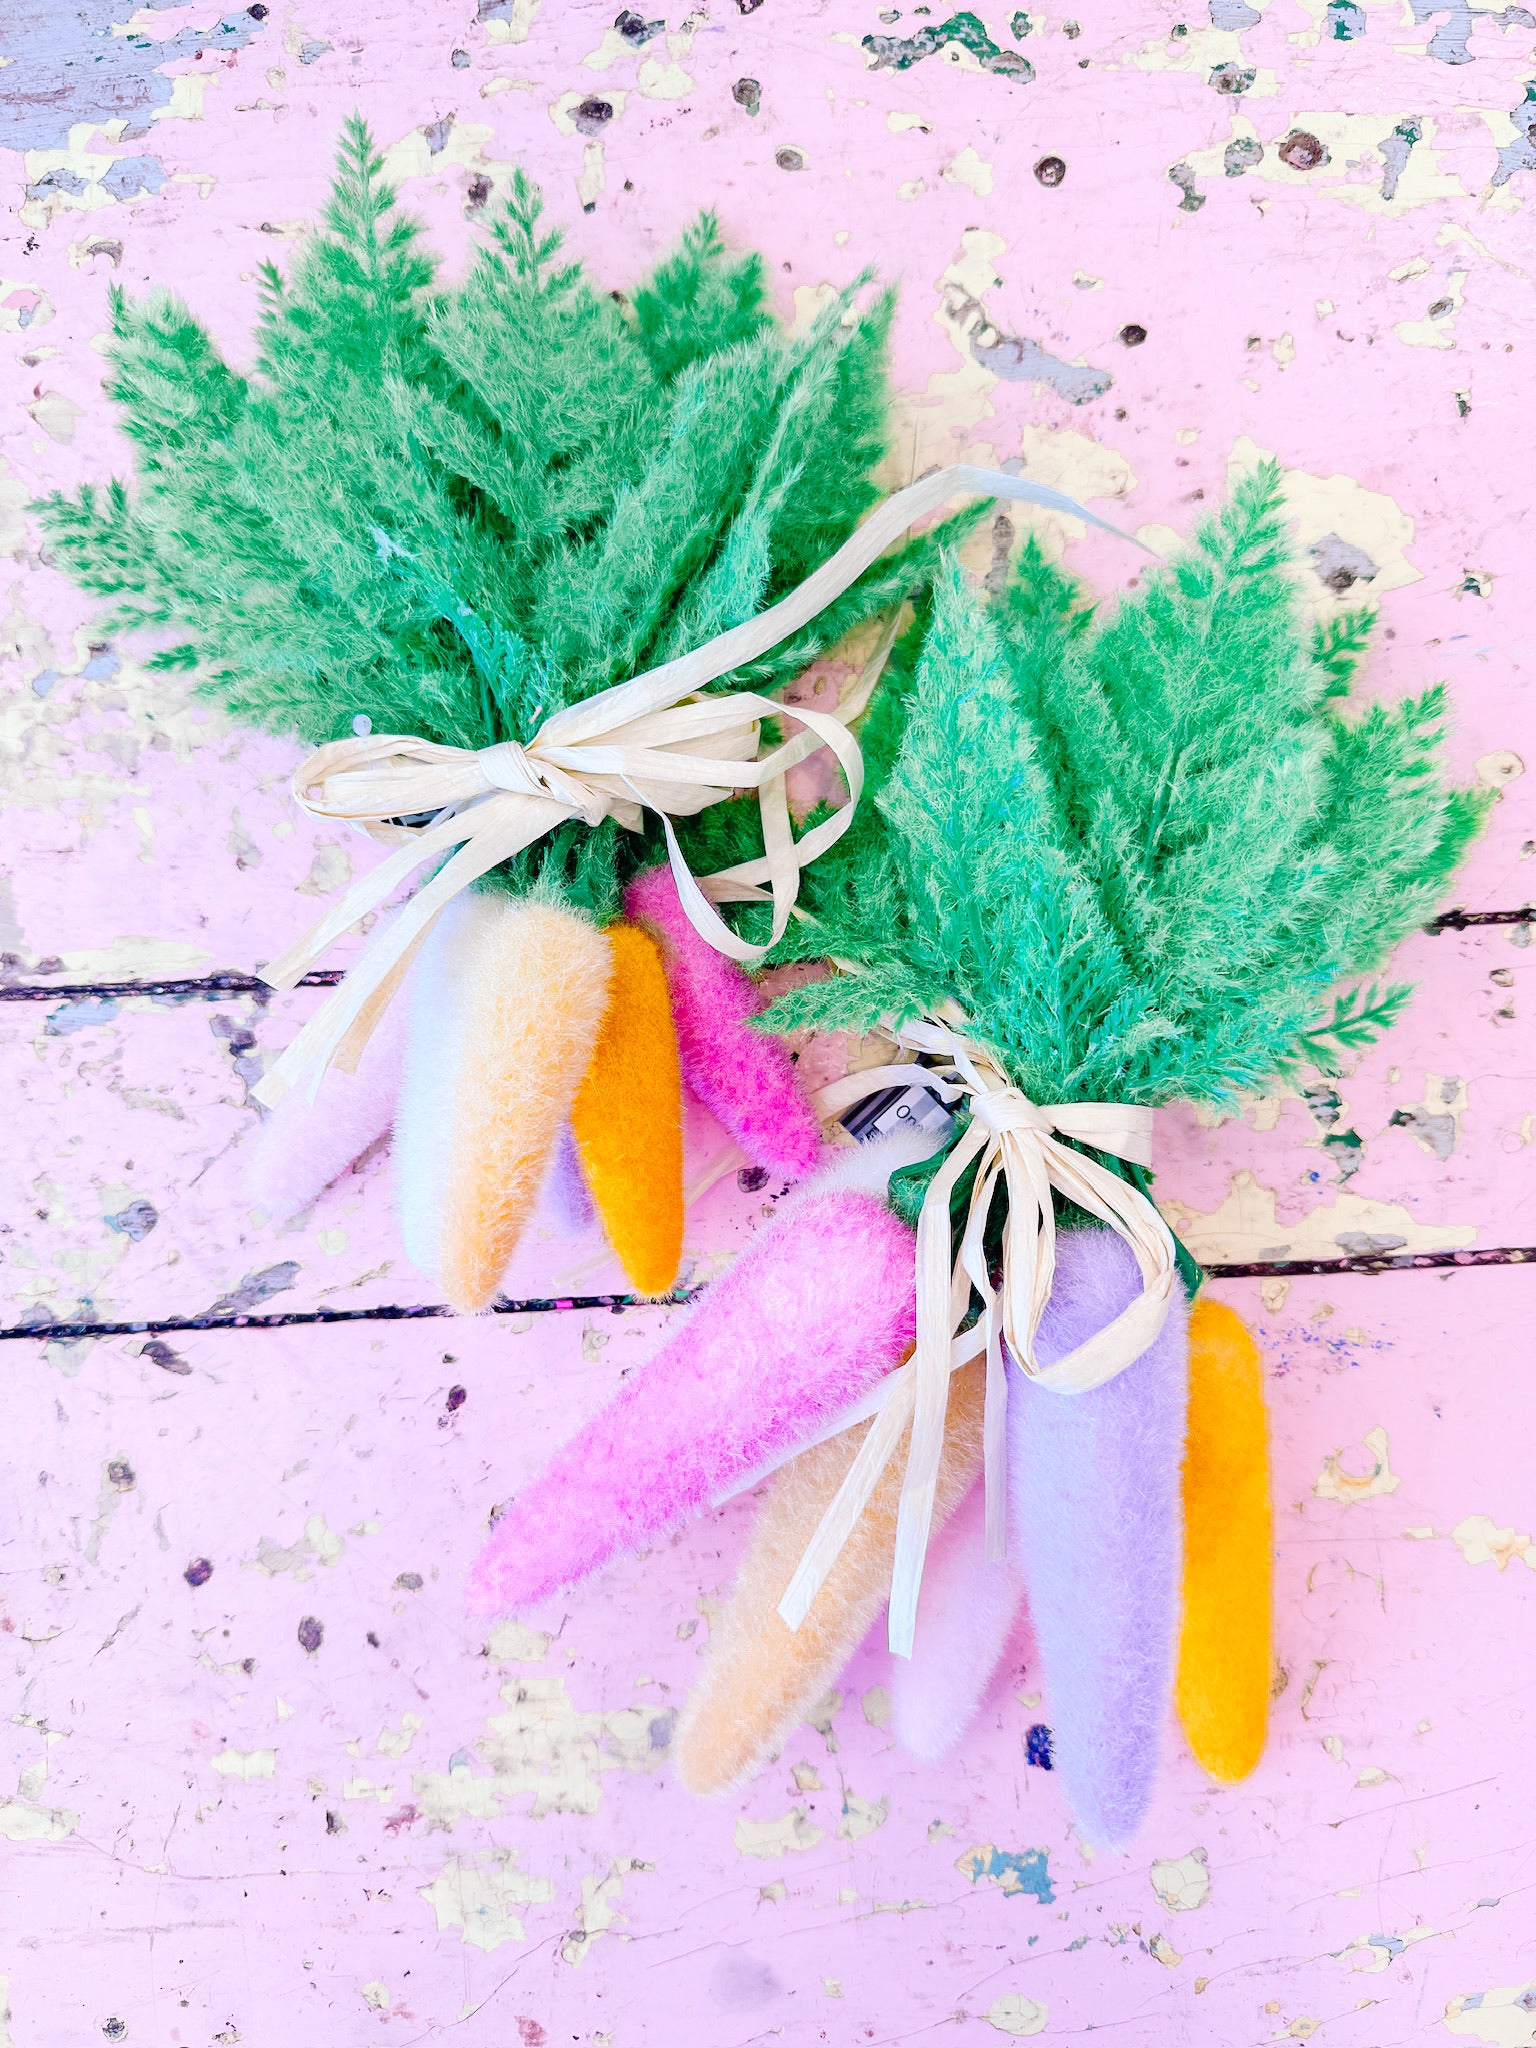 LG FLOCKED CARROT CLUSTER OF 6 - COLORFUL